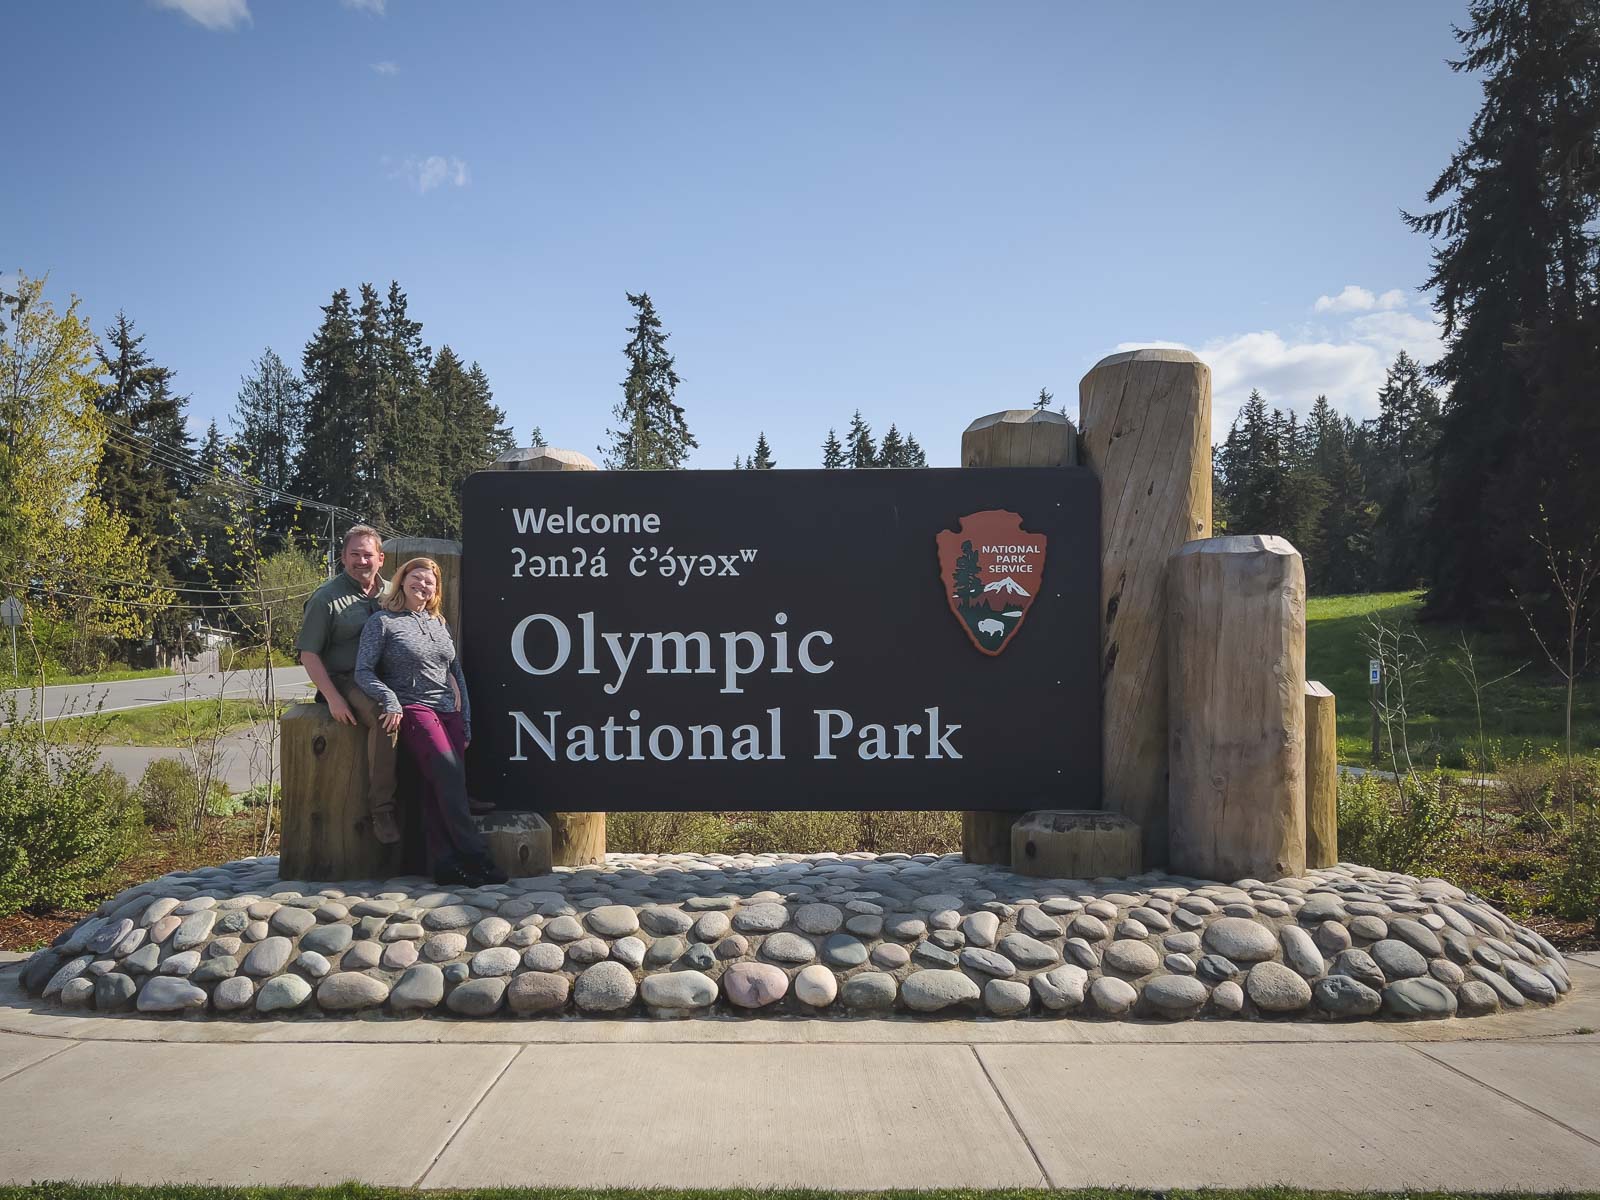 Top Things to do in Olympic National Park